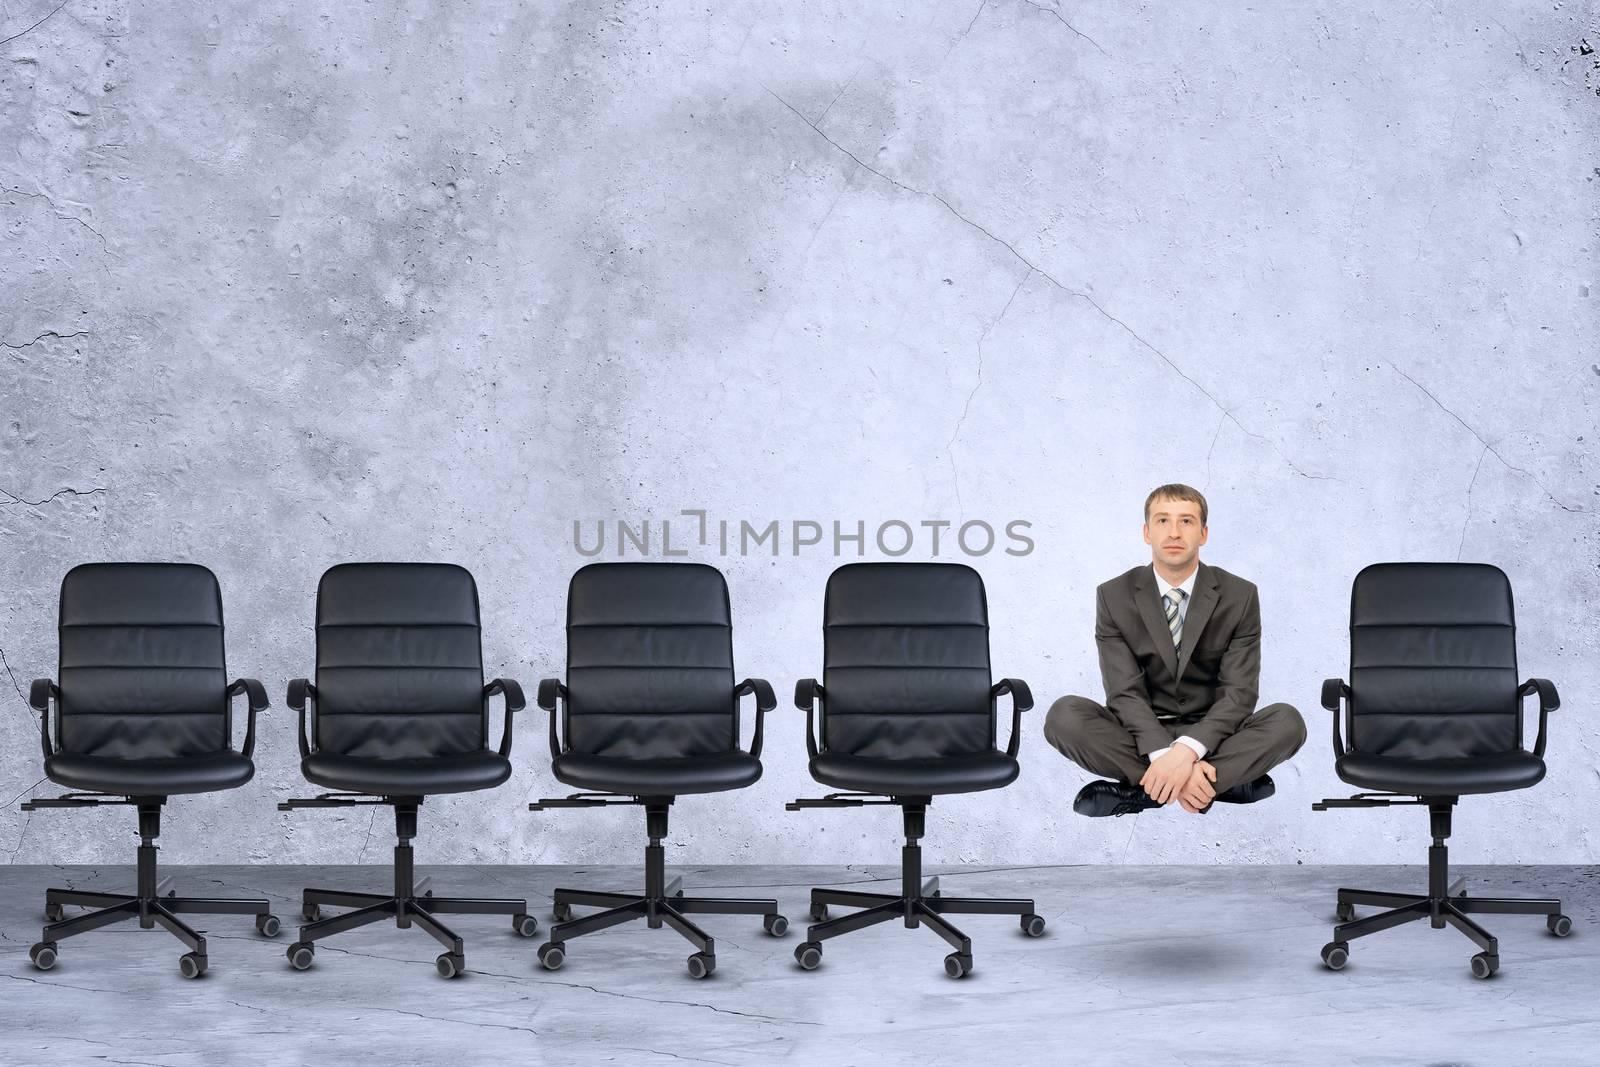 Businessman in lotus posture by cherezoff